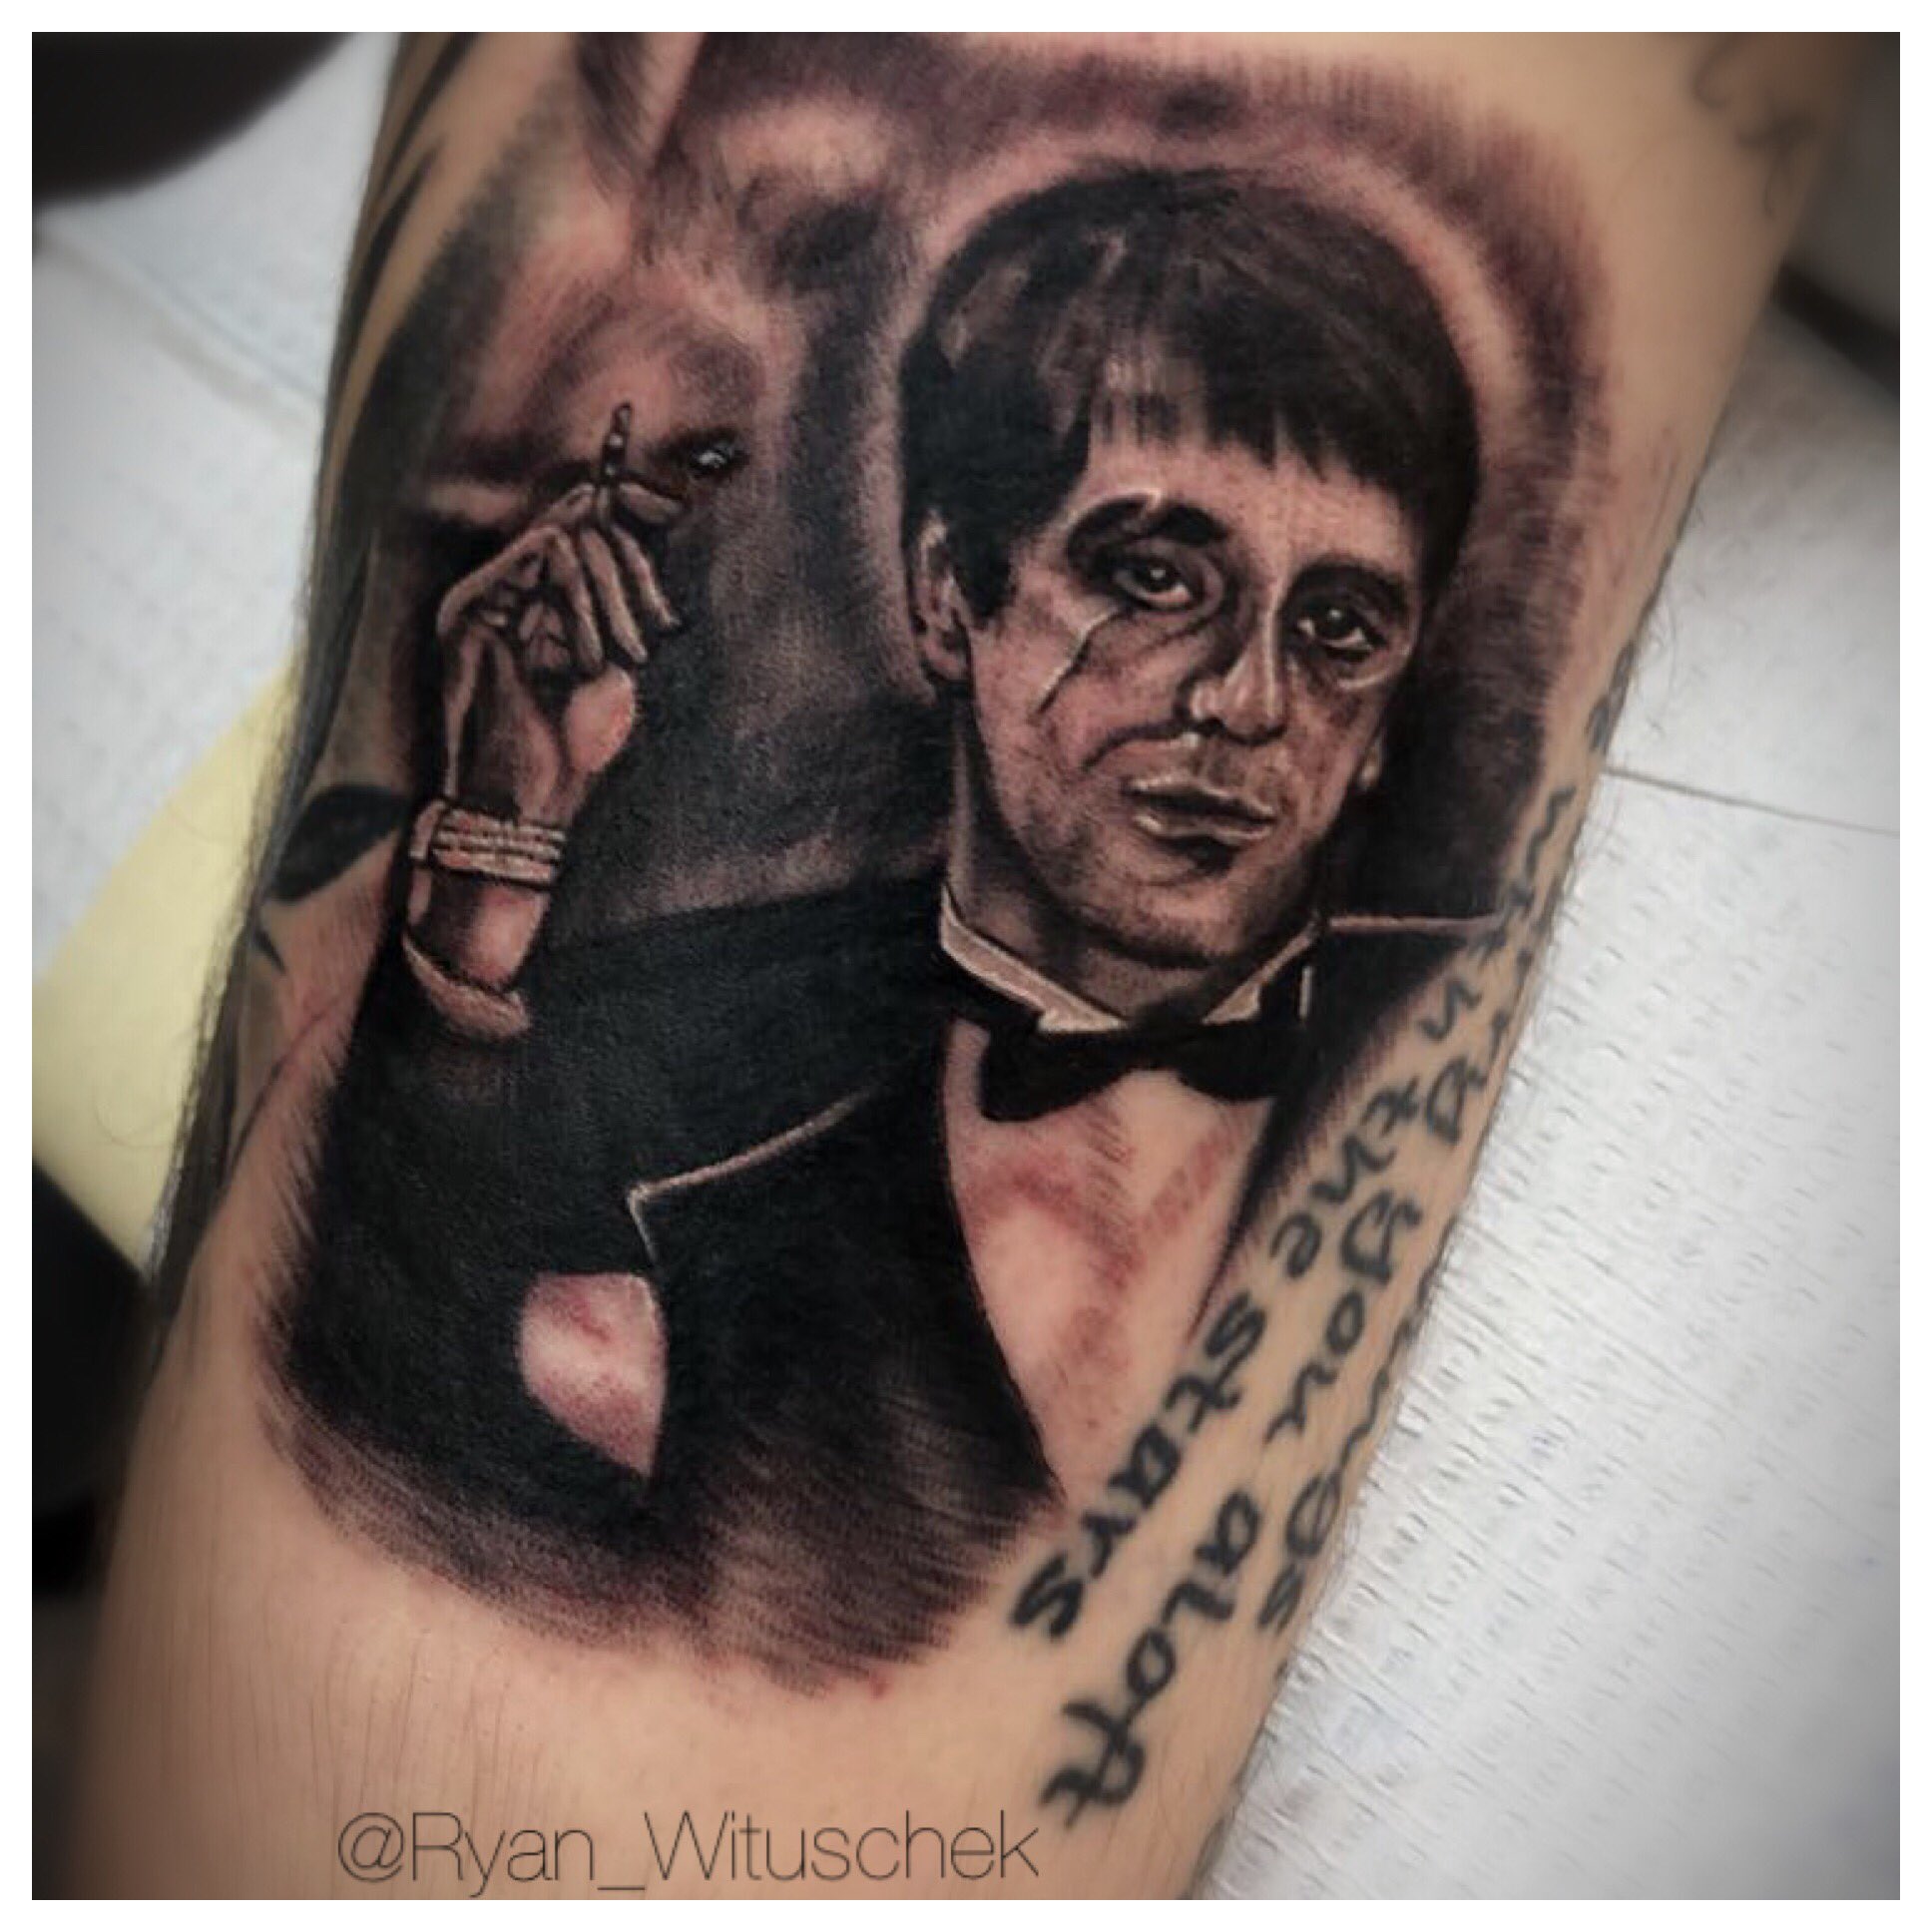 Willy G Tattoo  Say hello to my little friend Tony MontanaScarface  portrait done today Start of moviegangster themed leg sleeve  Facebook